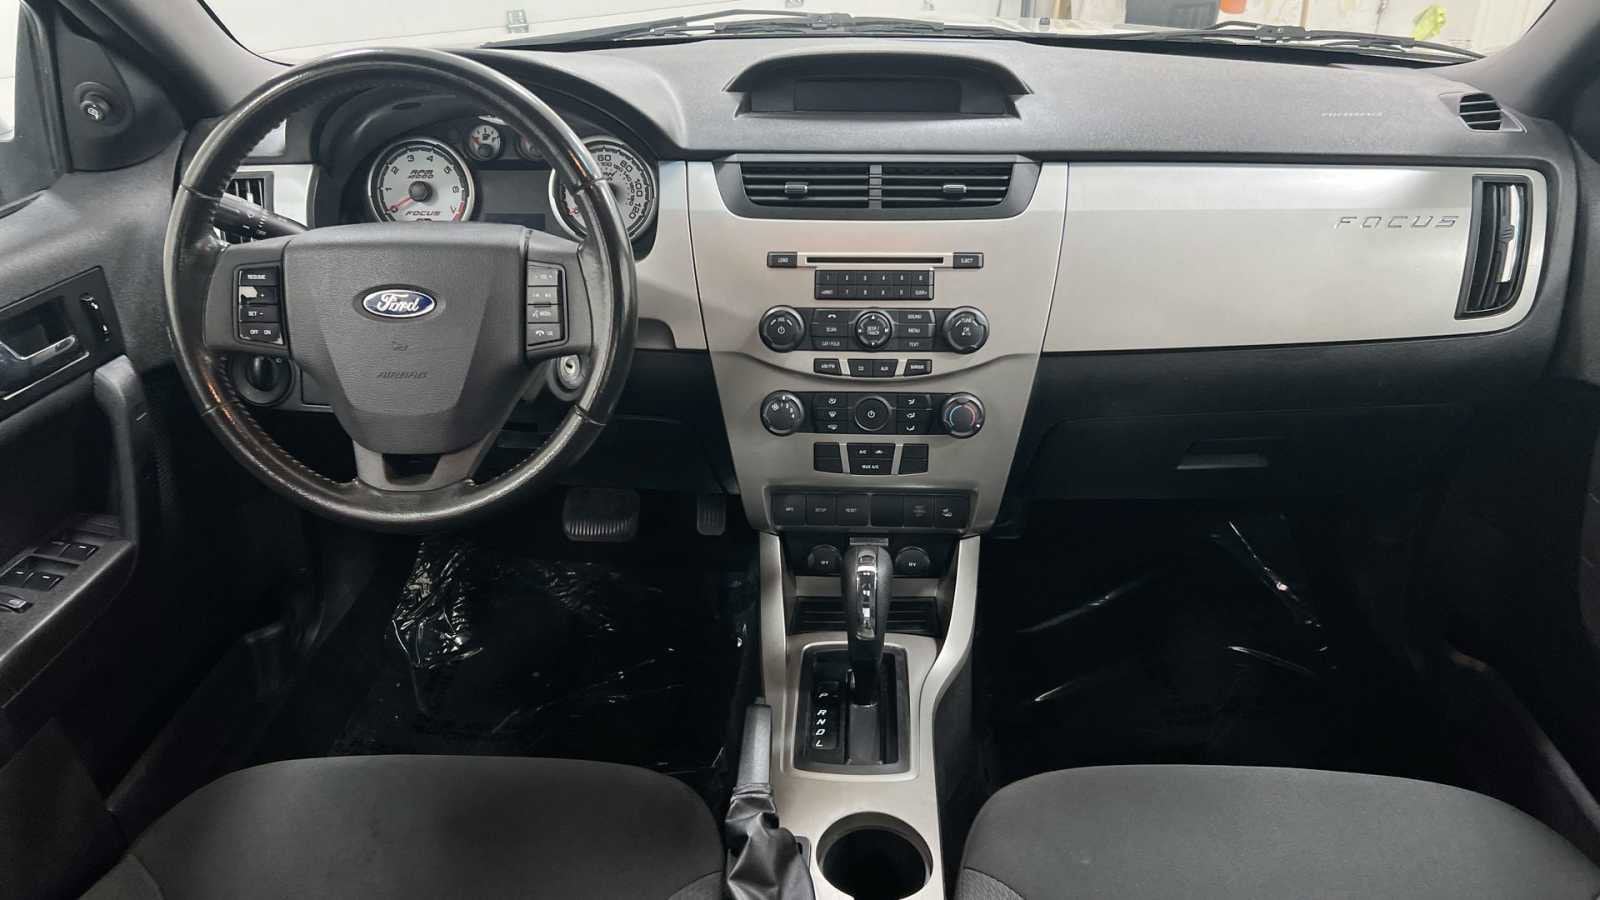 2009 Ford Focus SES 24